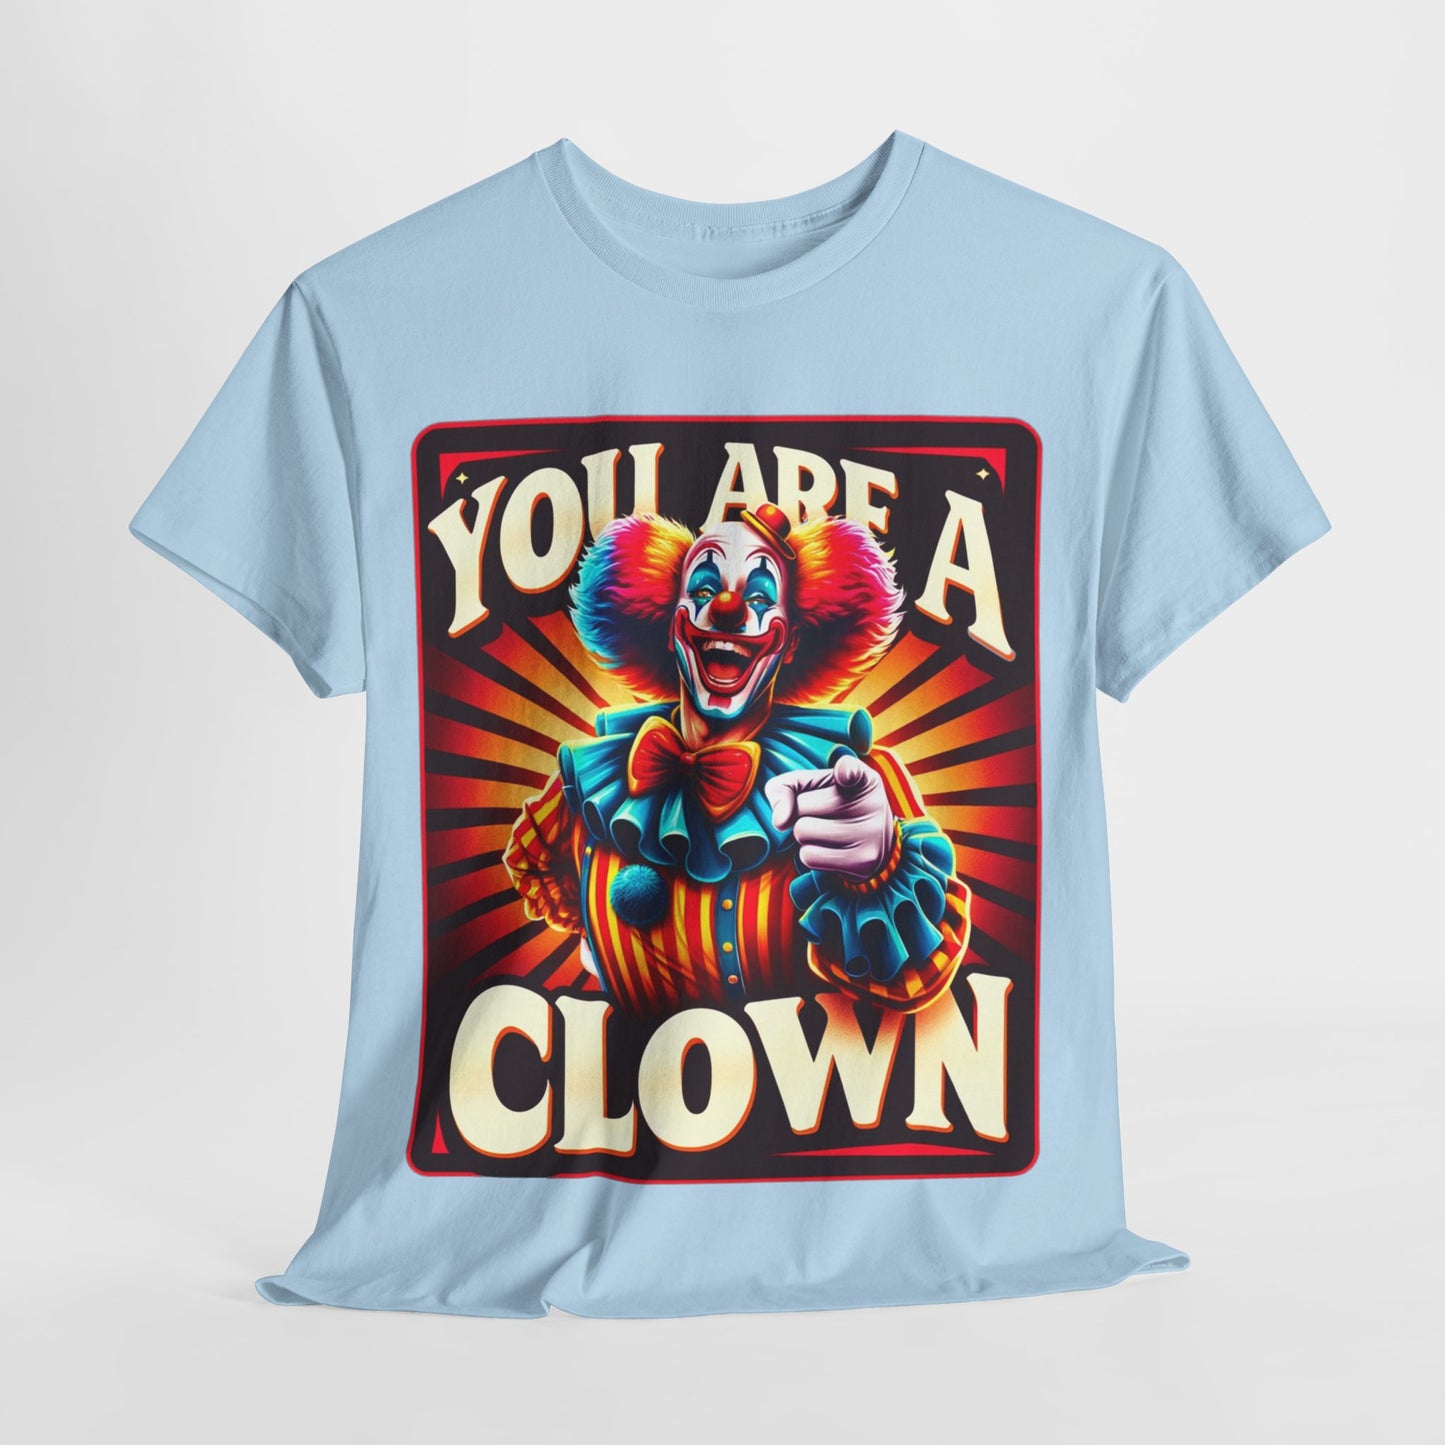 "Buy Now: 'You are a Clown' T-Shirt – Viral Pin-Up Style Tee for a Bold, Humorous Look" 🎪🤡